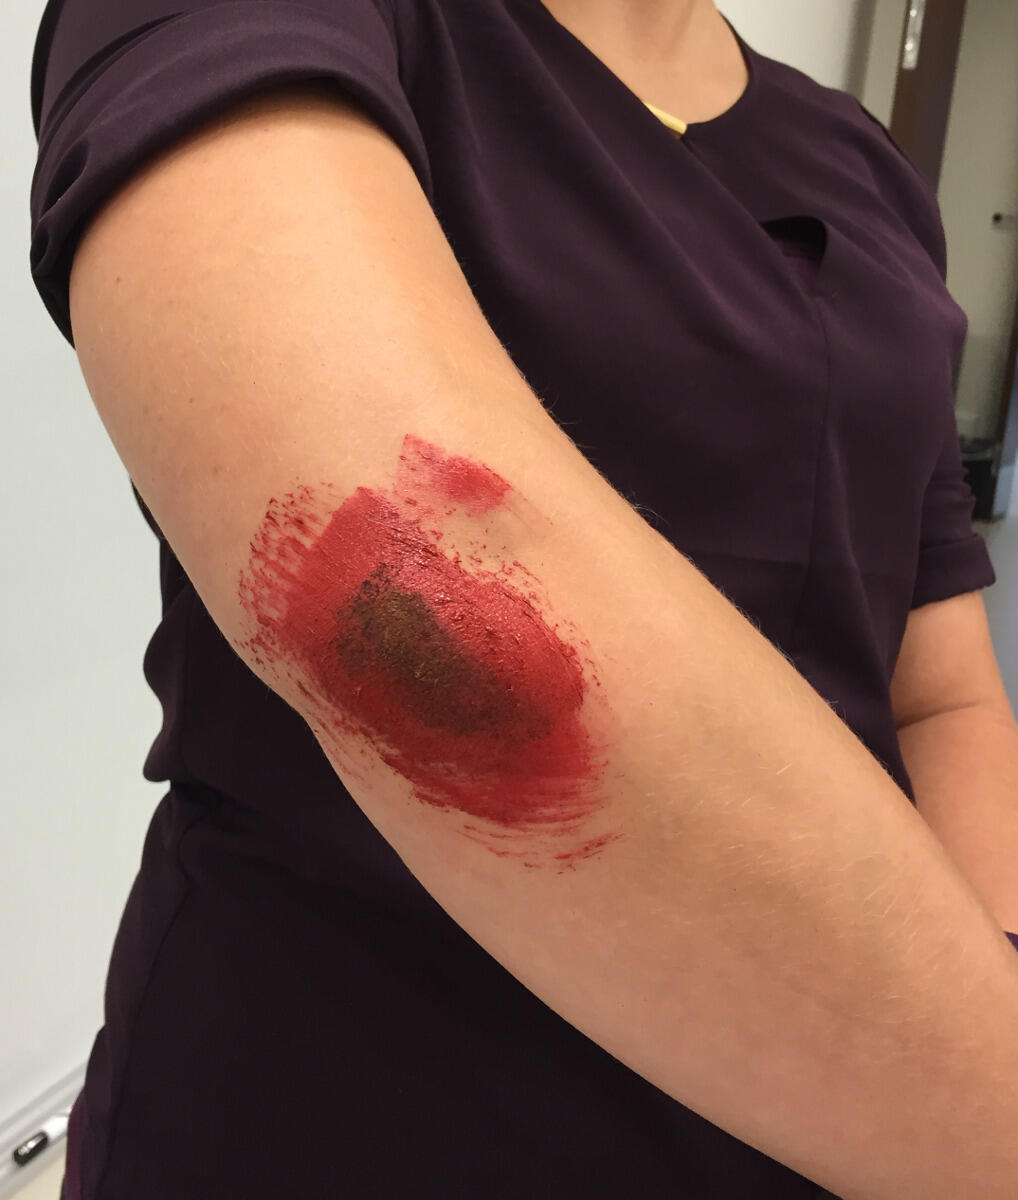 A road rash “patient’s” painted abrasion was used to demonstrate how to clean, treat and bandage common bike injuries.